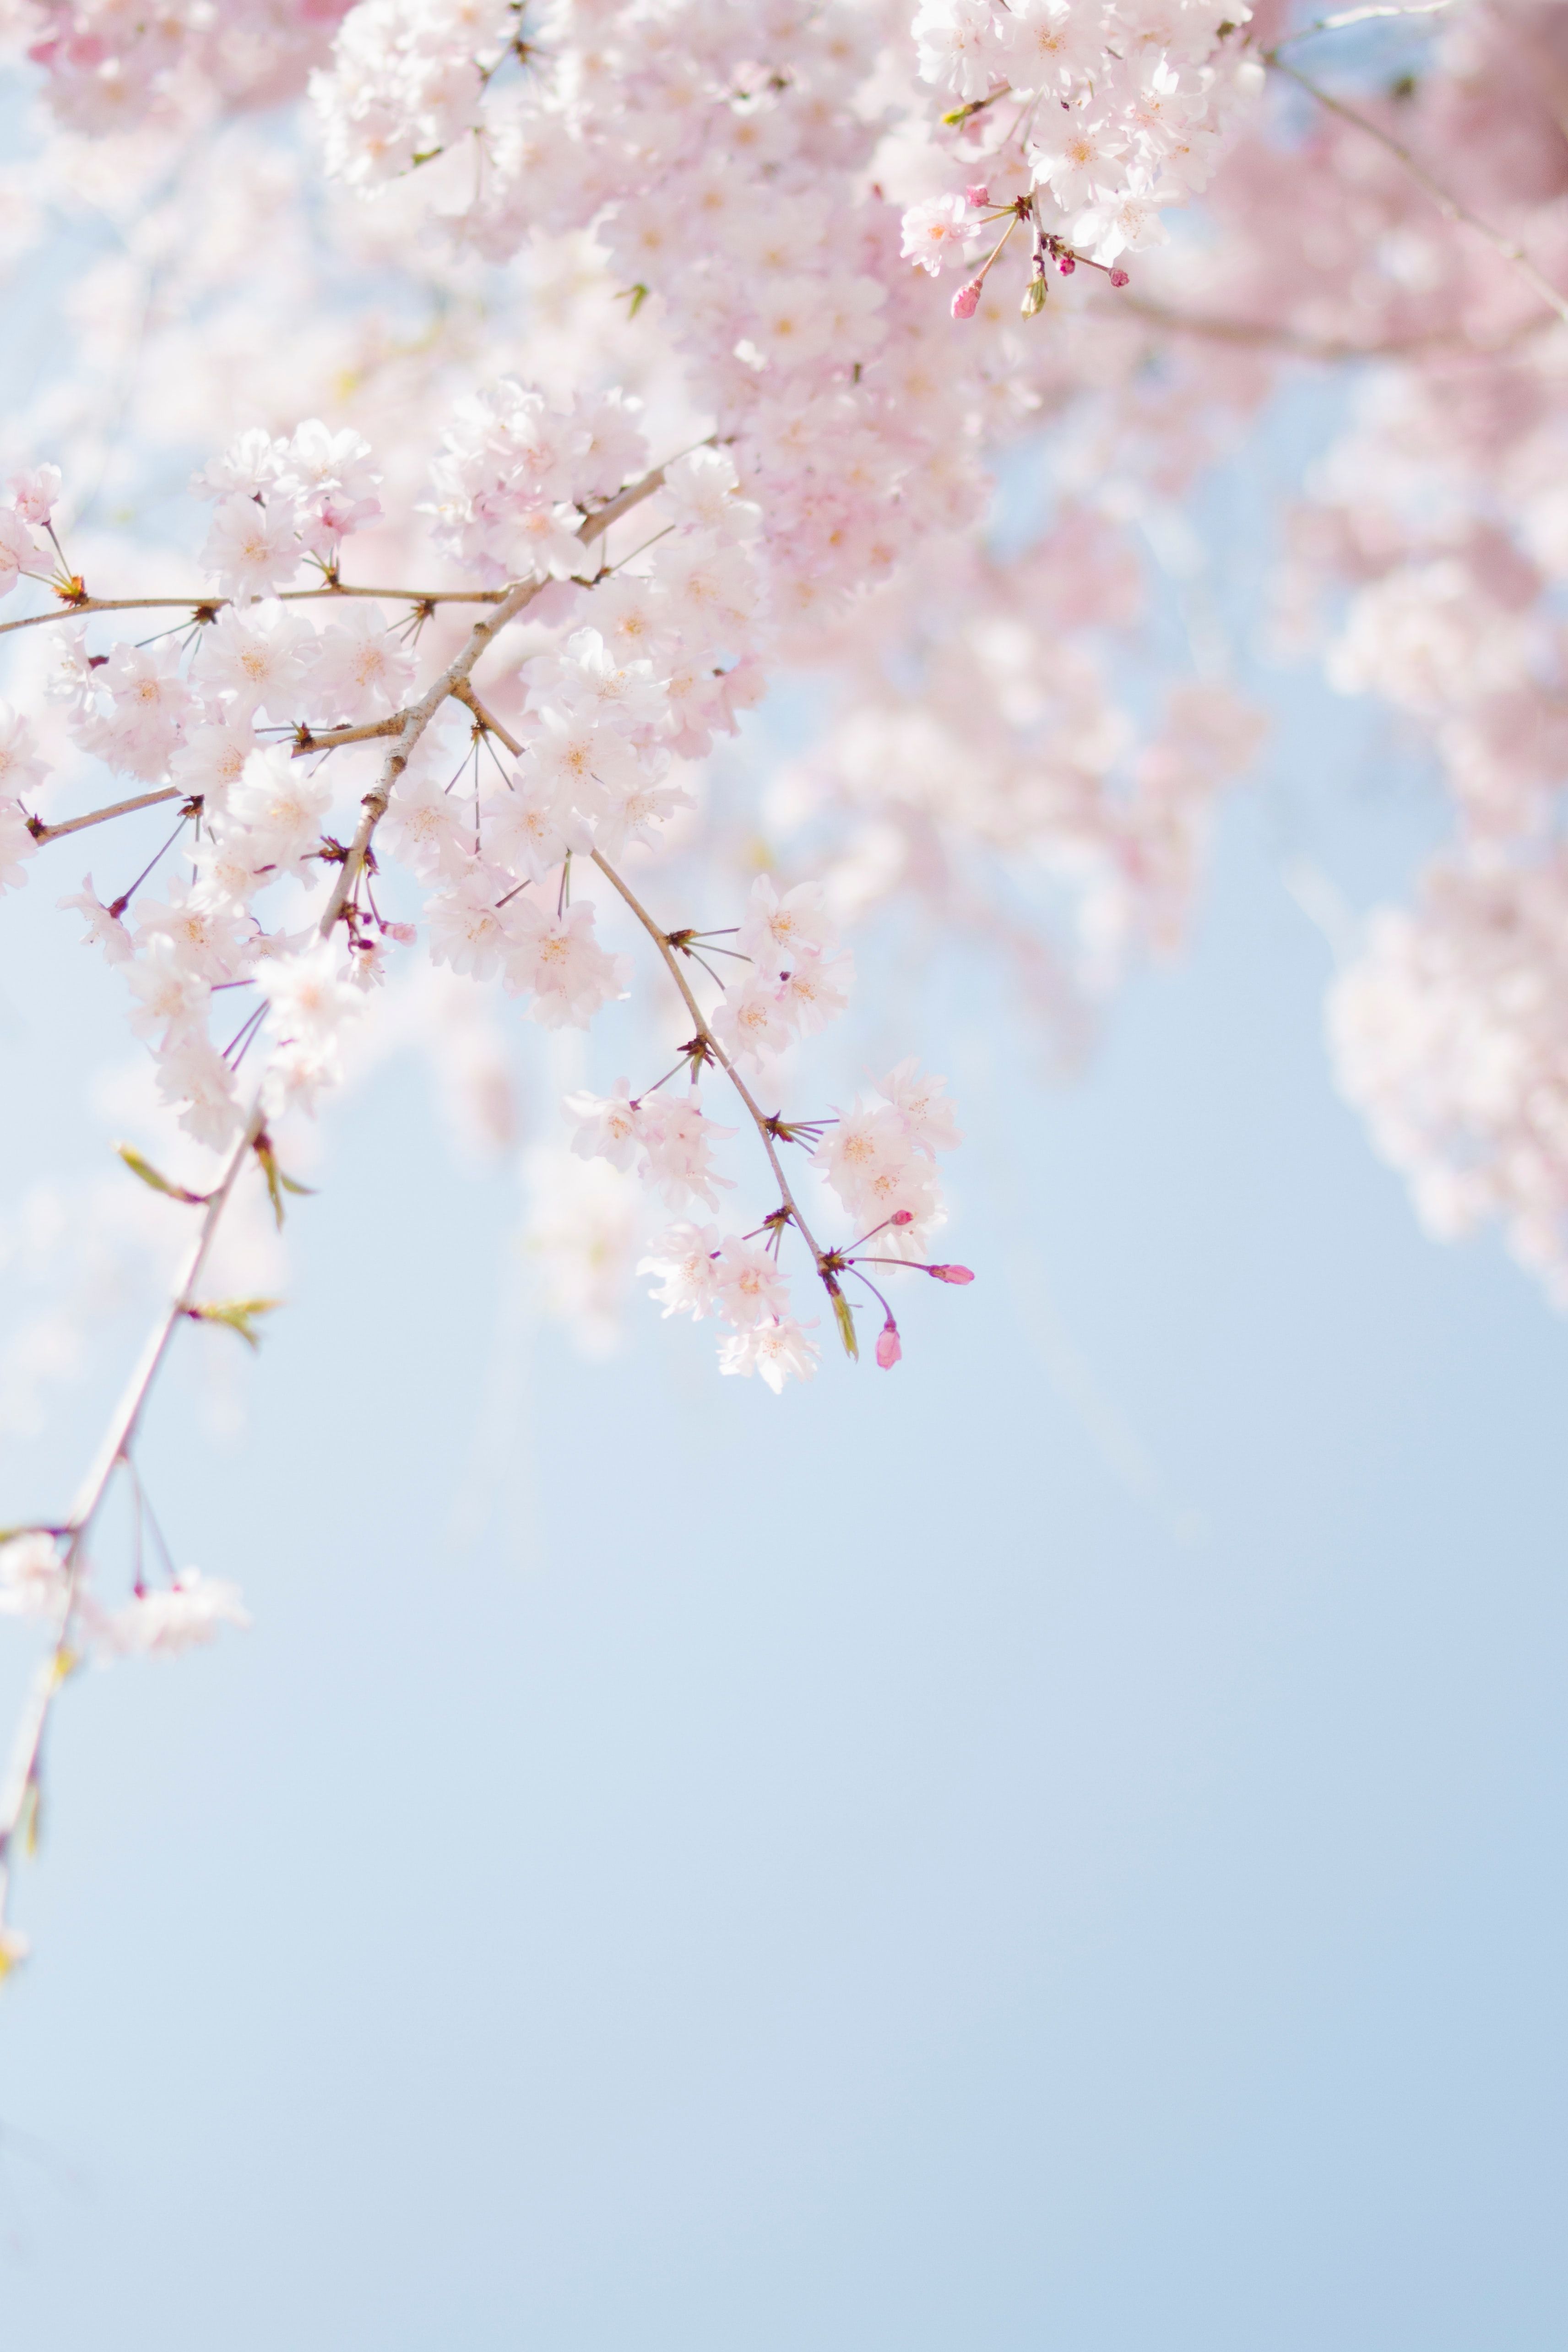 Cherry Blossom Wallpapers: Free HD Download [500+ HQ]